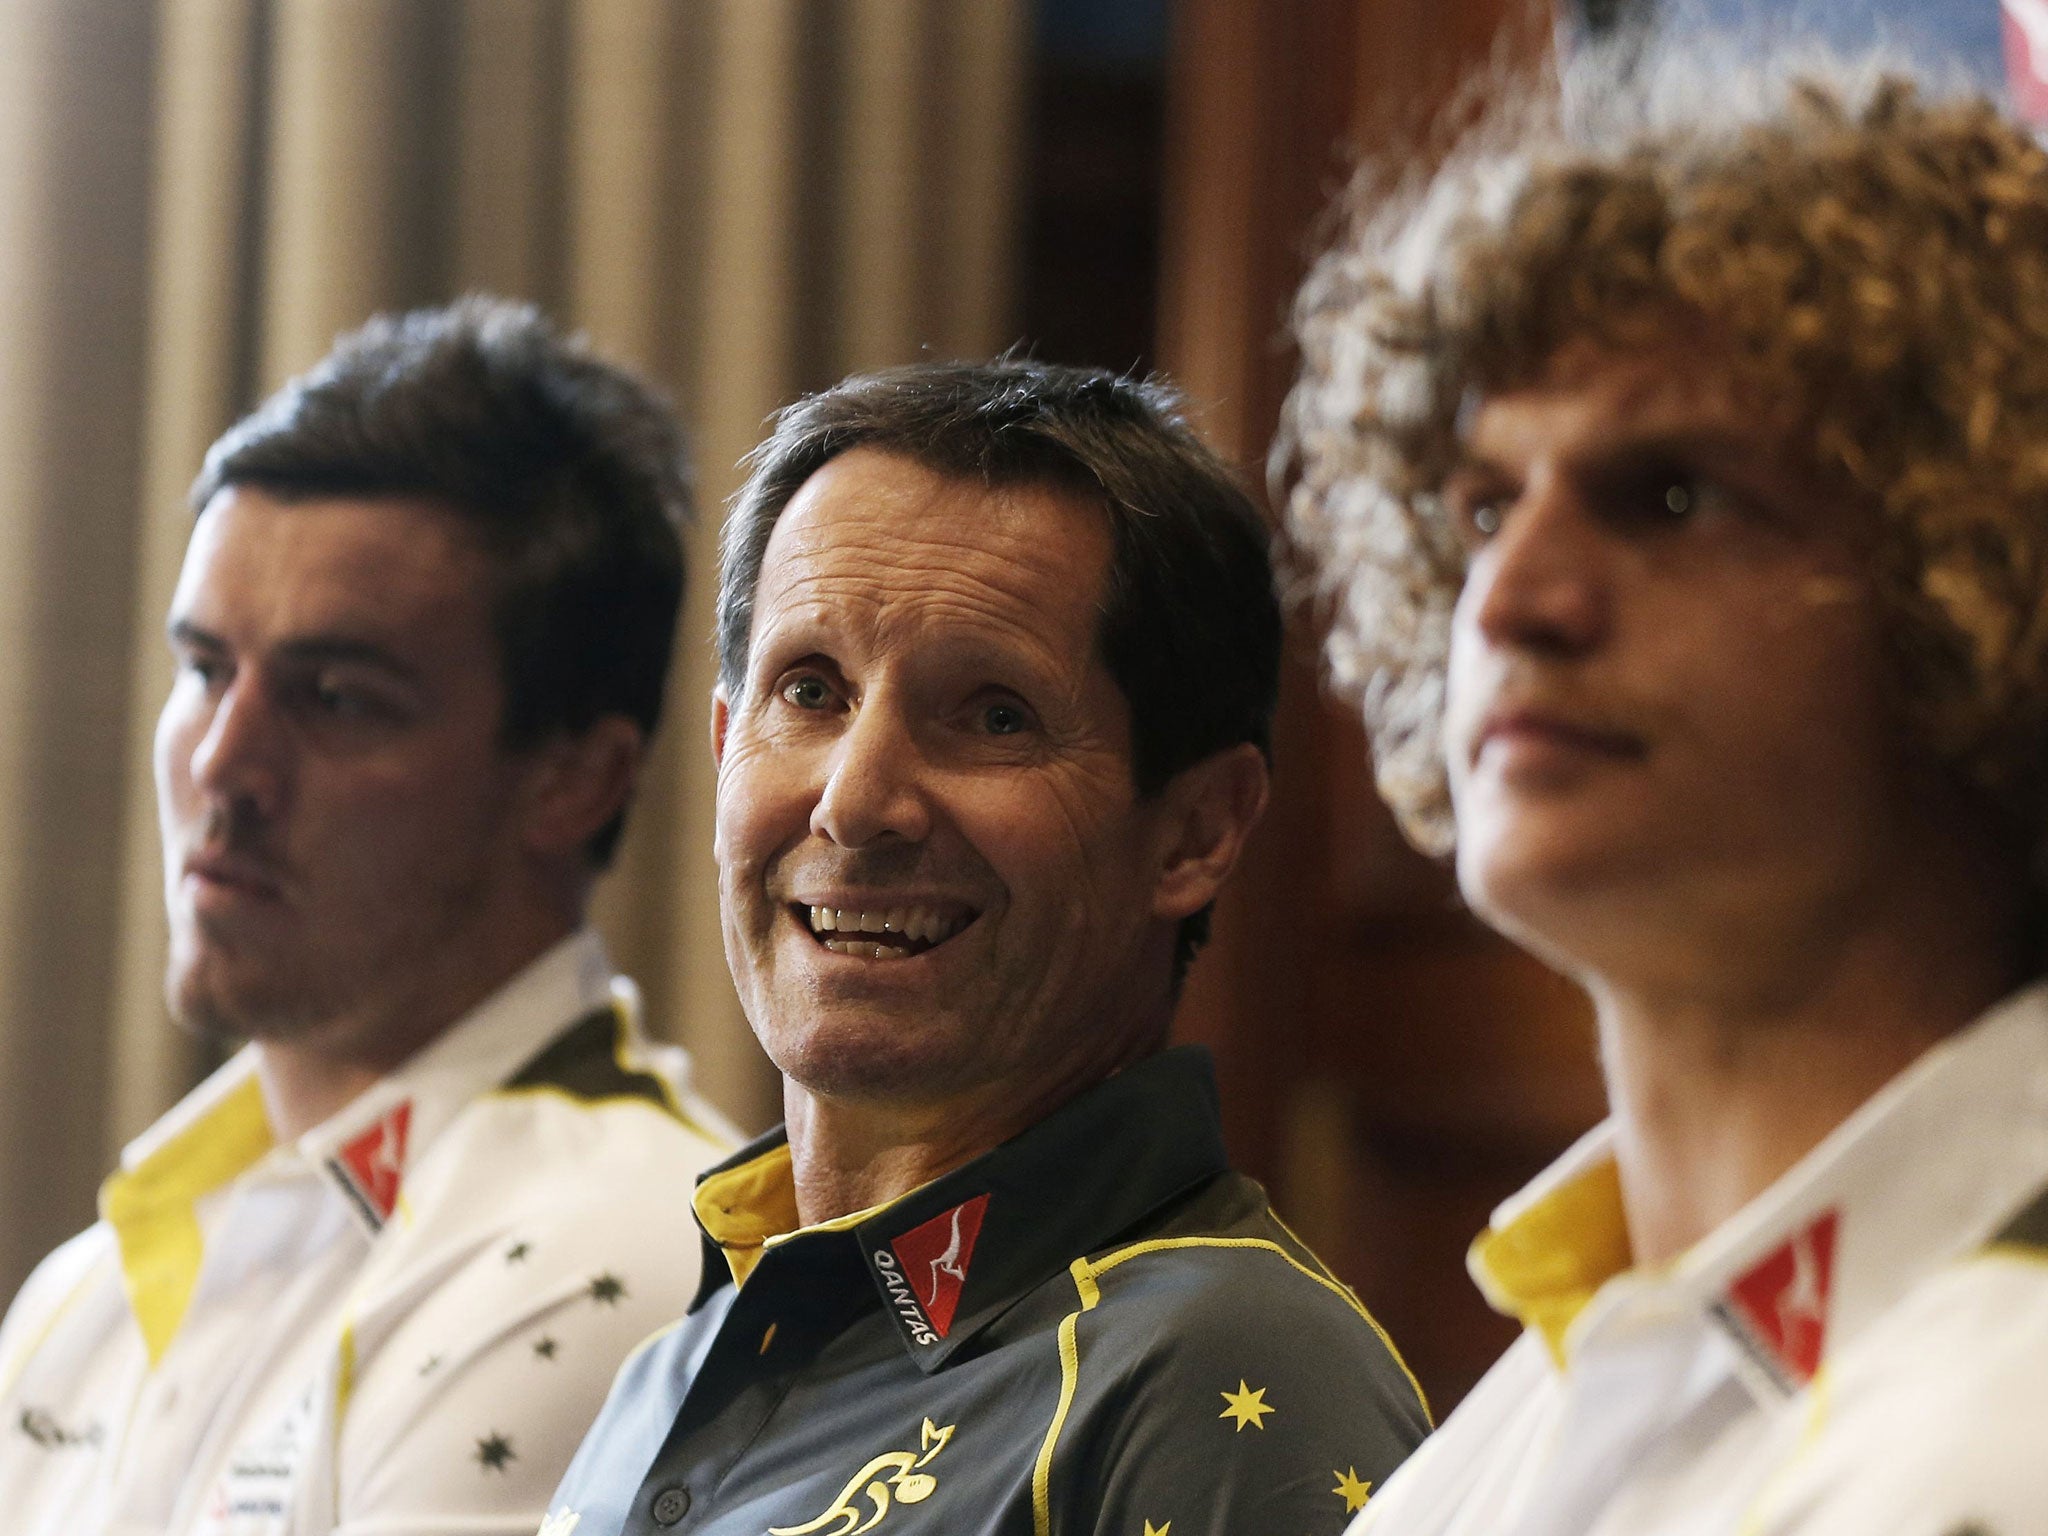 The Wallabies have been training with coach Robbie Deans